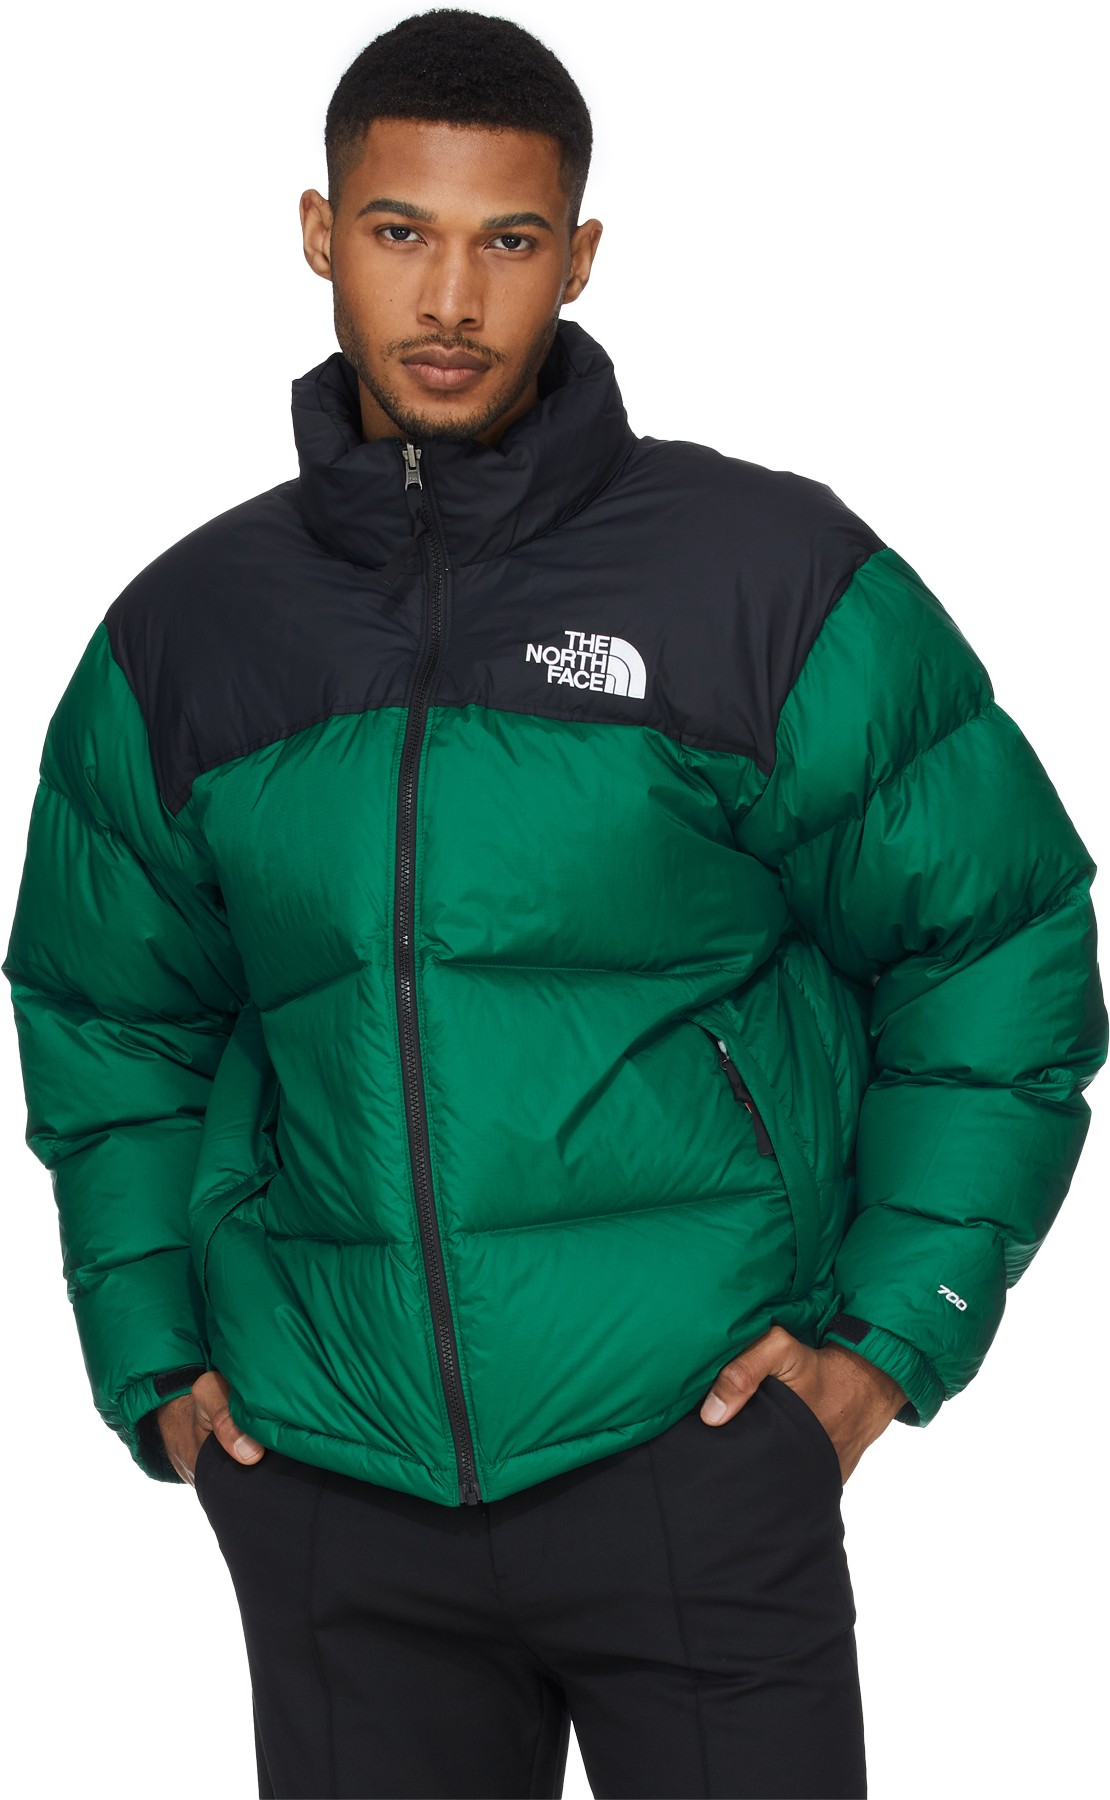 the north face manteau vert